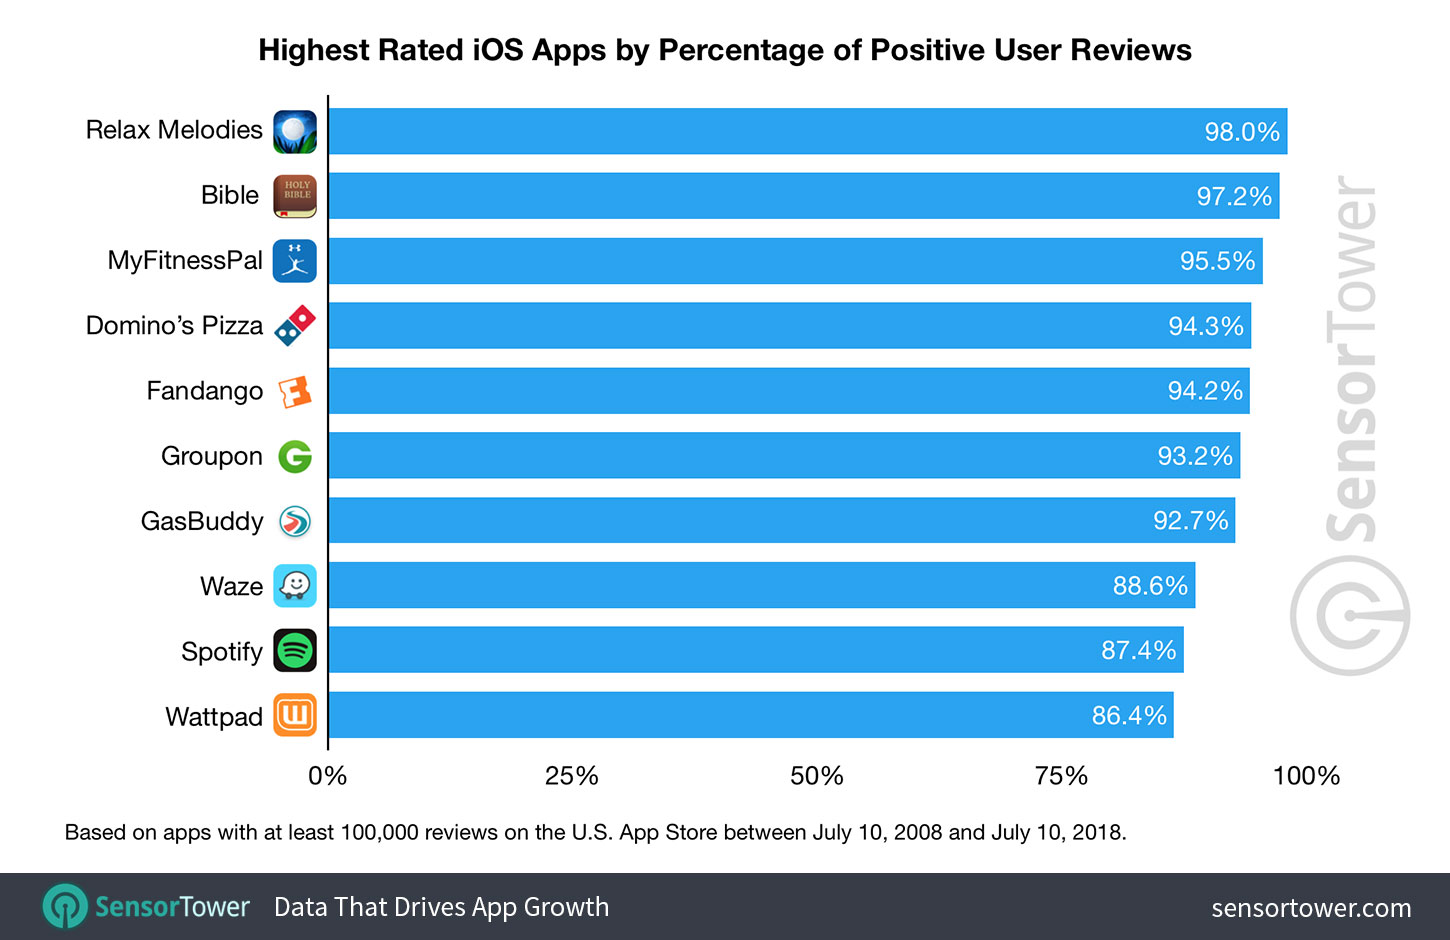 Chart showing a ranking of the highest rated non-game apps on the U.S. App Store between 2008 and 2018